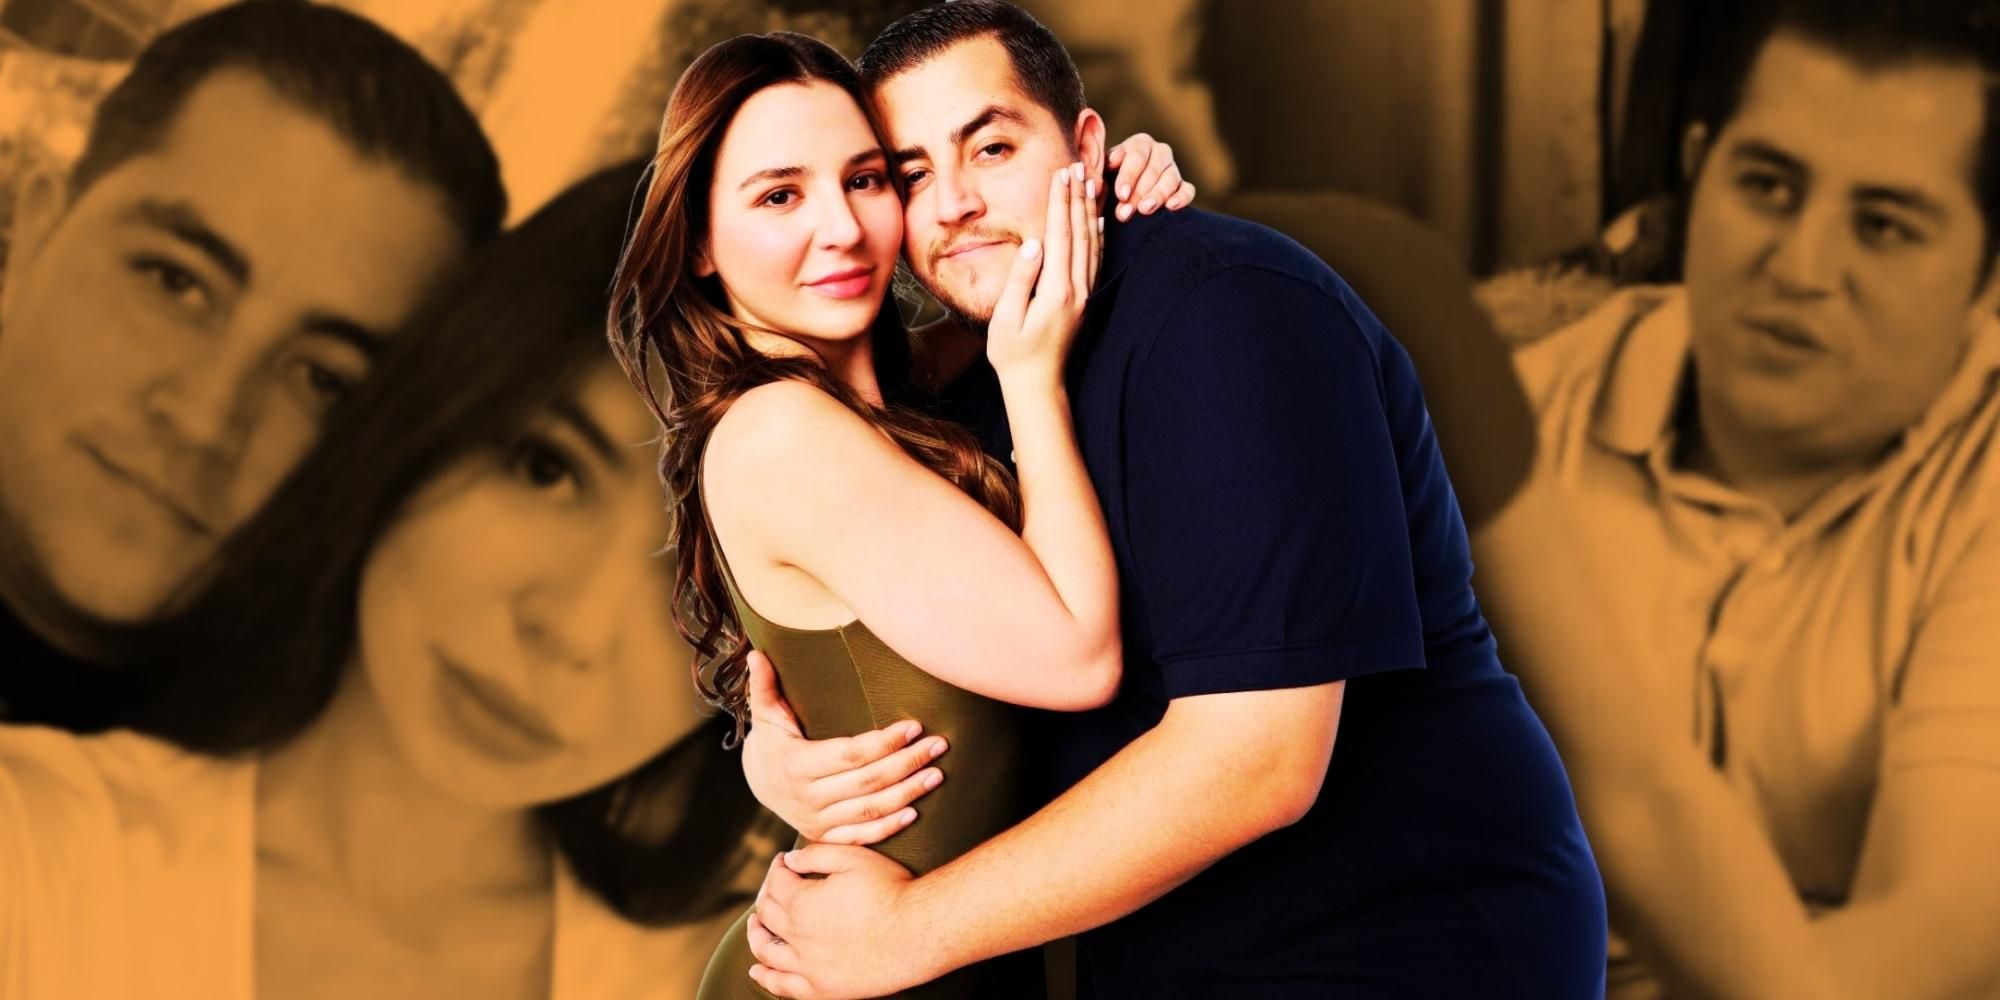 90 Day Fiancé Anfisa Arkhipcheno & Jorge Nava embrace each other in promo picture